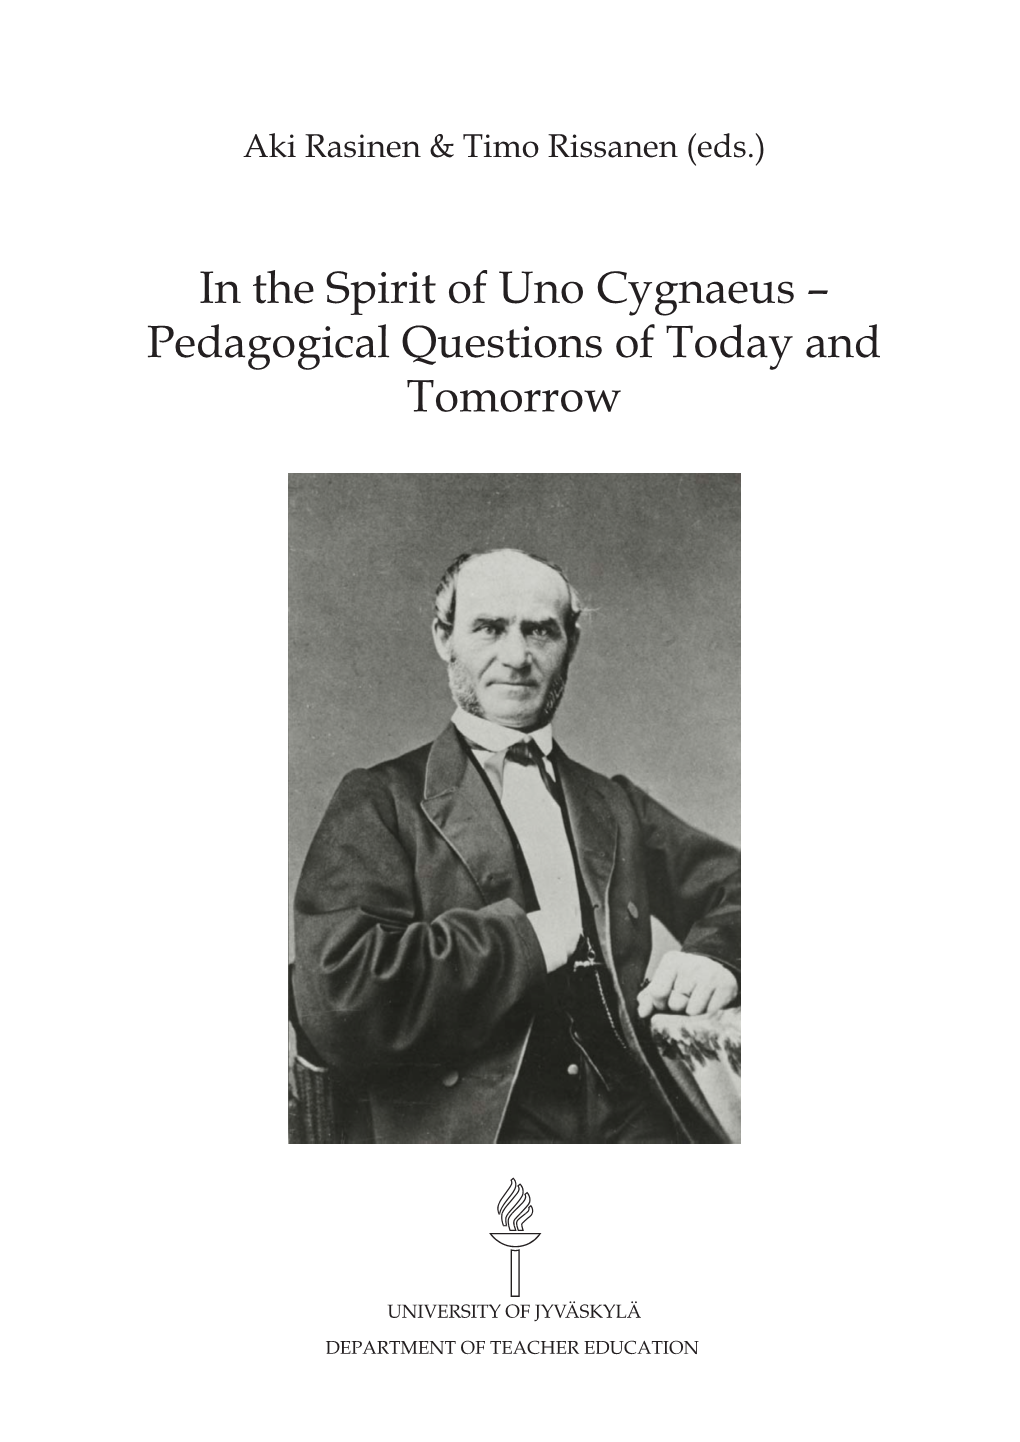 In the Spirit of Uno Cygnaeus – Pedagogical Questions of Today and Tomorrow